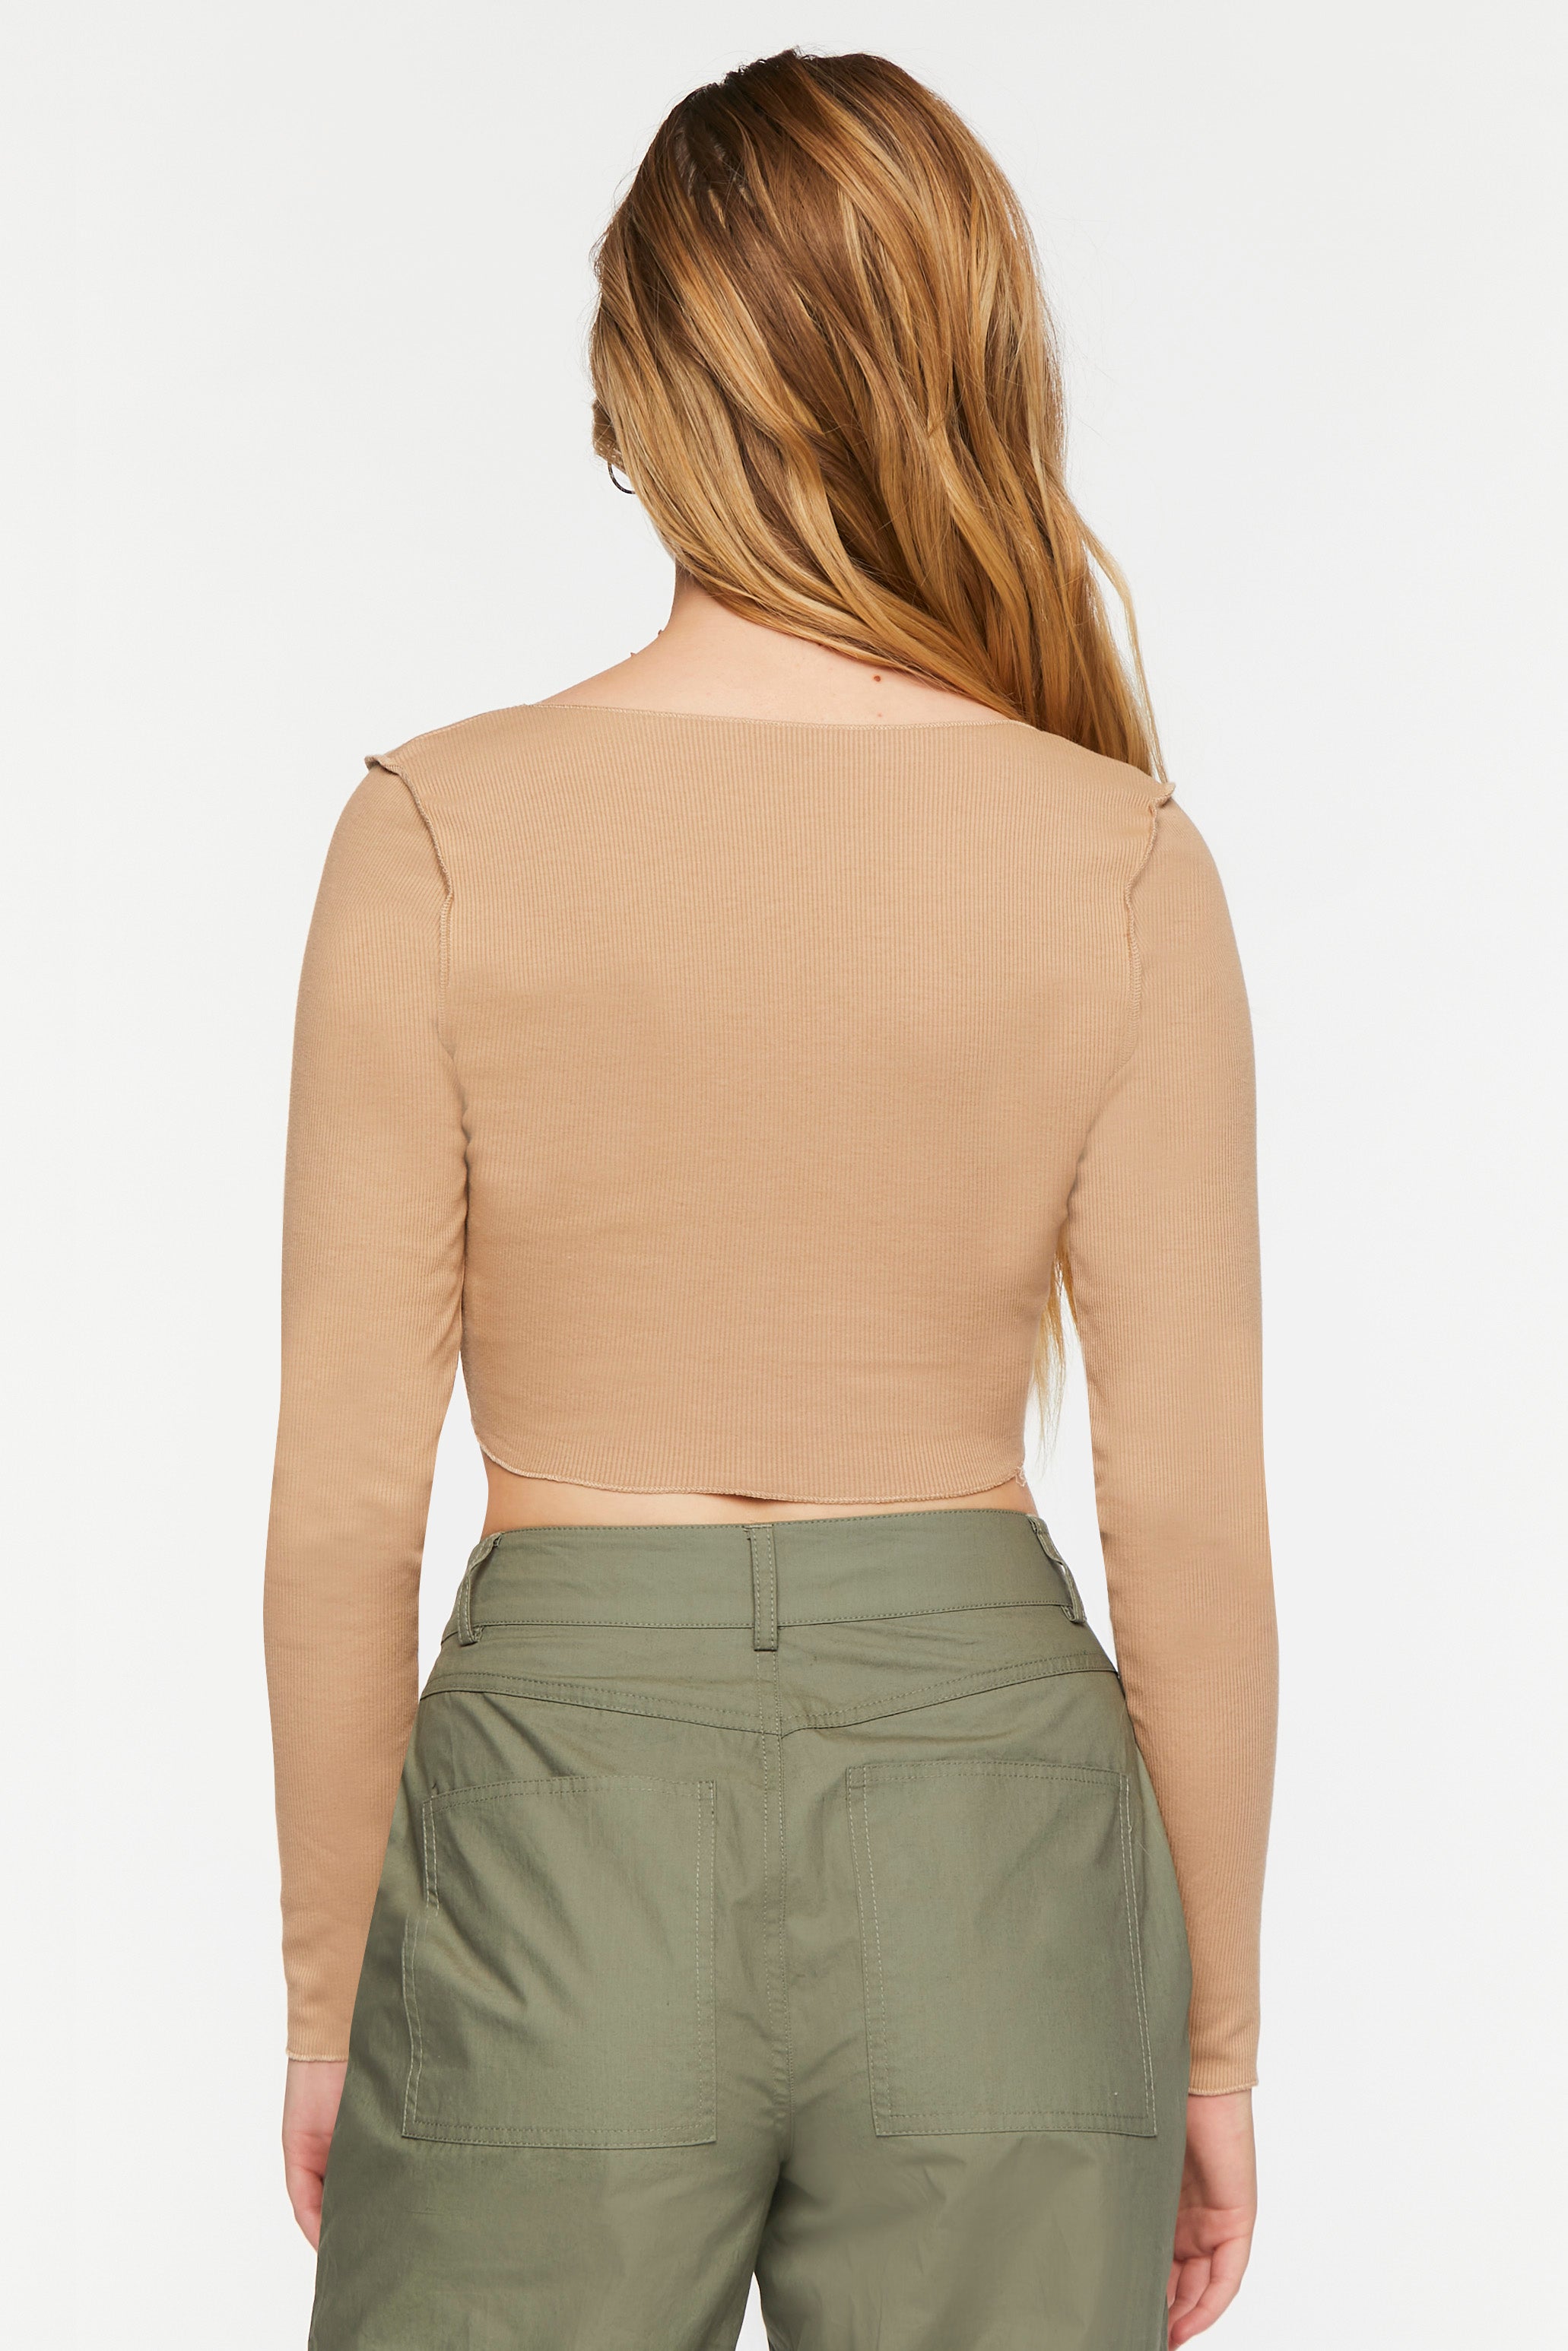 Taupe Exposed Seam Long-Sleeve Crop Top  2